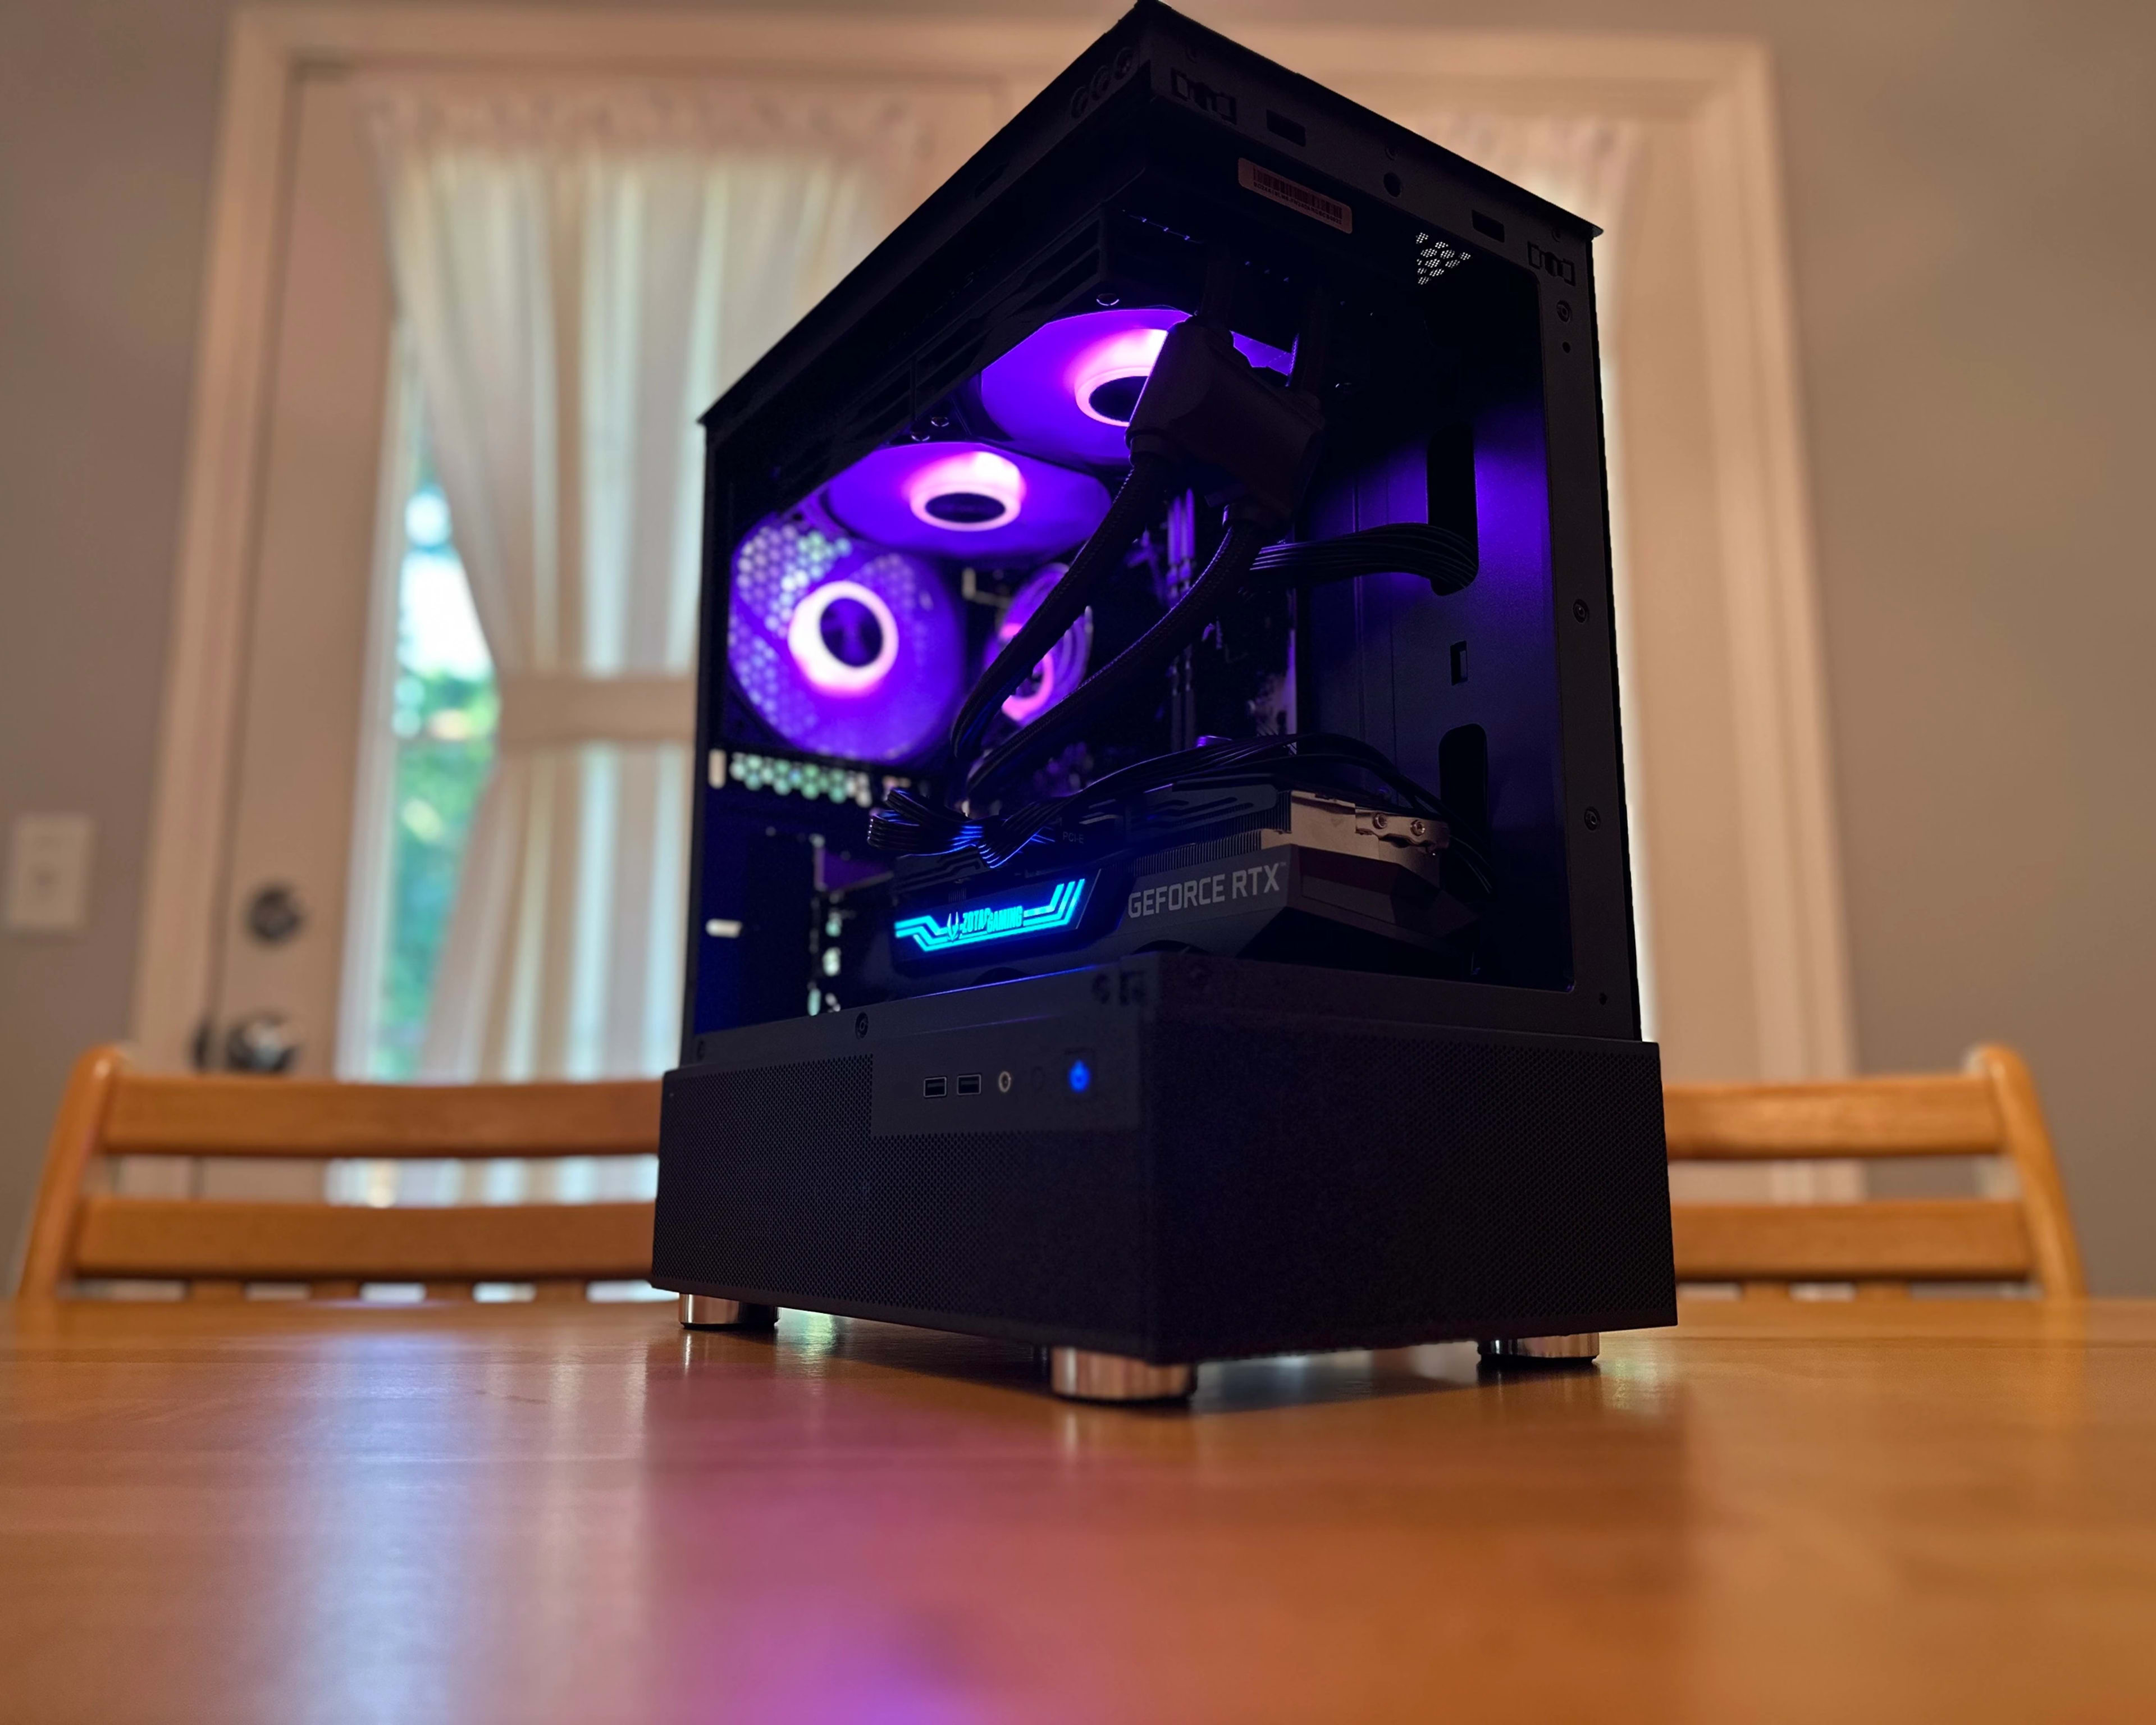 💜🧊| RTX 3080ti 12gb, Ryzen 3600x, 32gb DDR4, 1tb SSD, AIO Cooled WiFi Equipped Gaming/Streaming PC